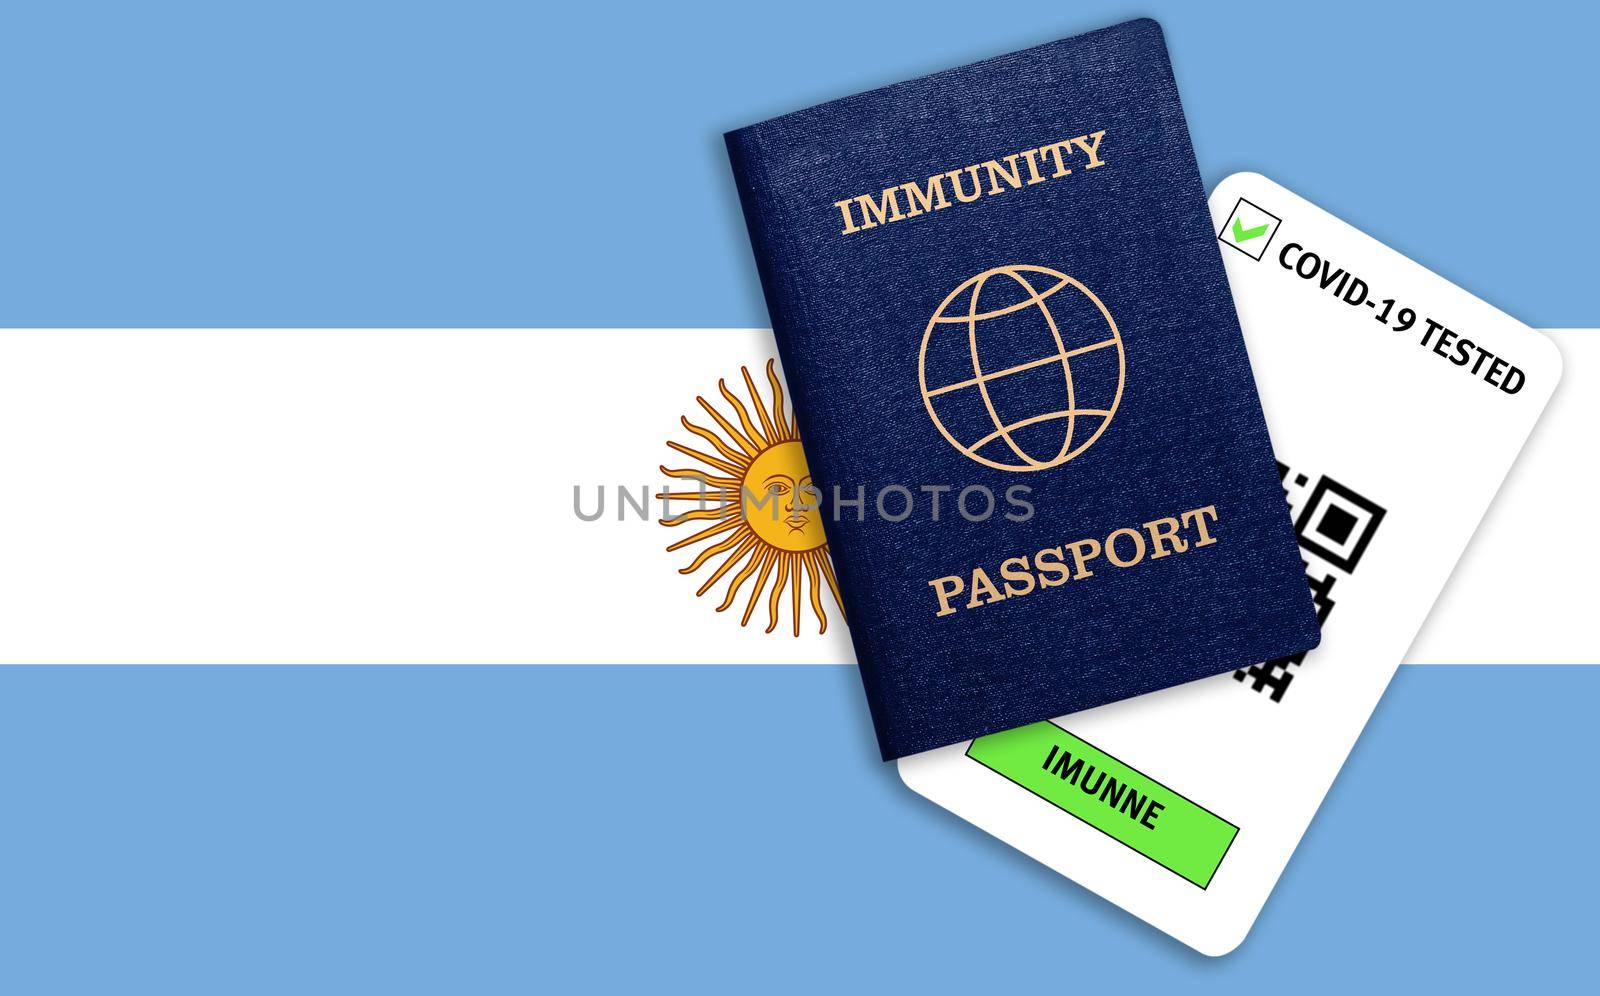 Concept of Immunity passport, certificate for traveling after pandemic for people who have had coronavirus or made vaccine and test result for COVID-19 on flag of Argentina